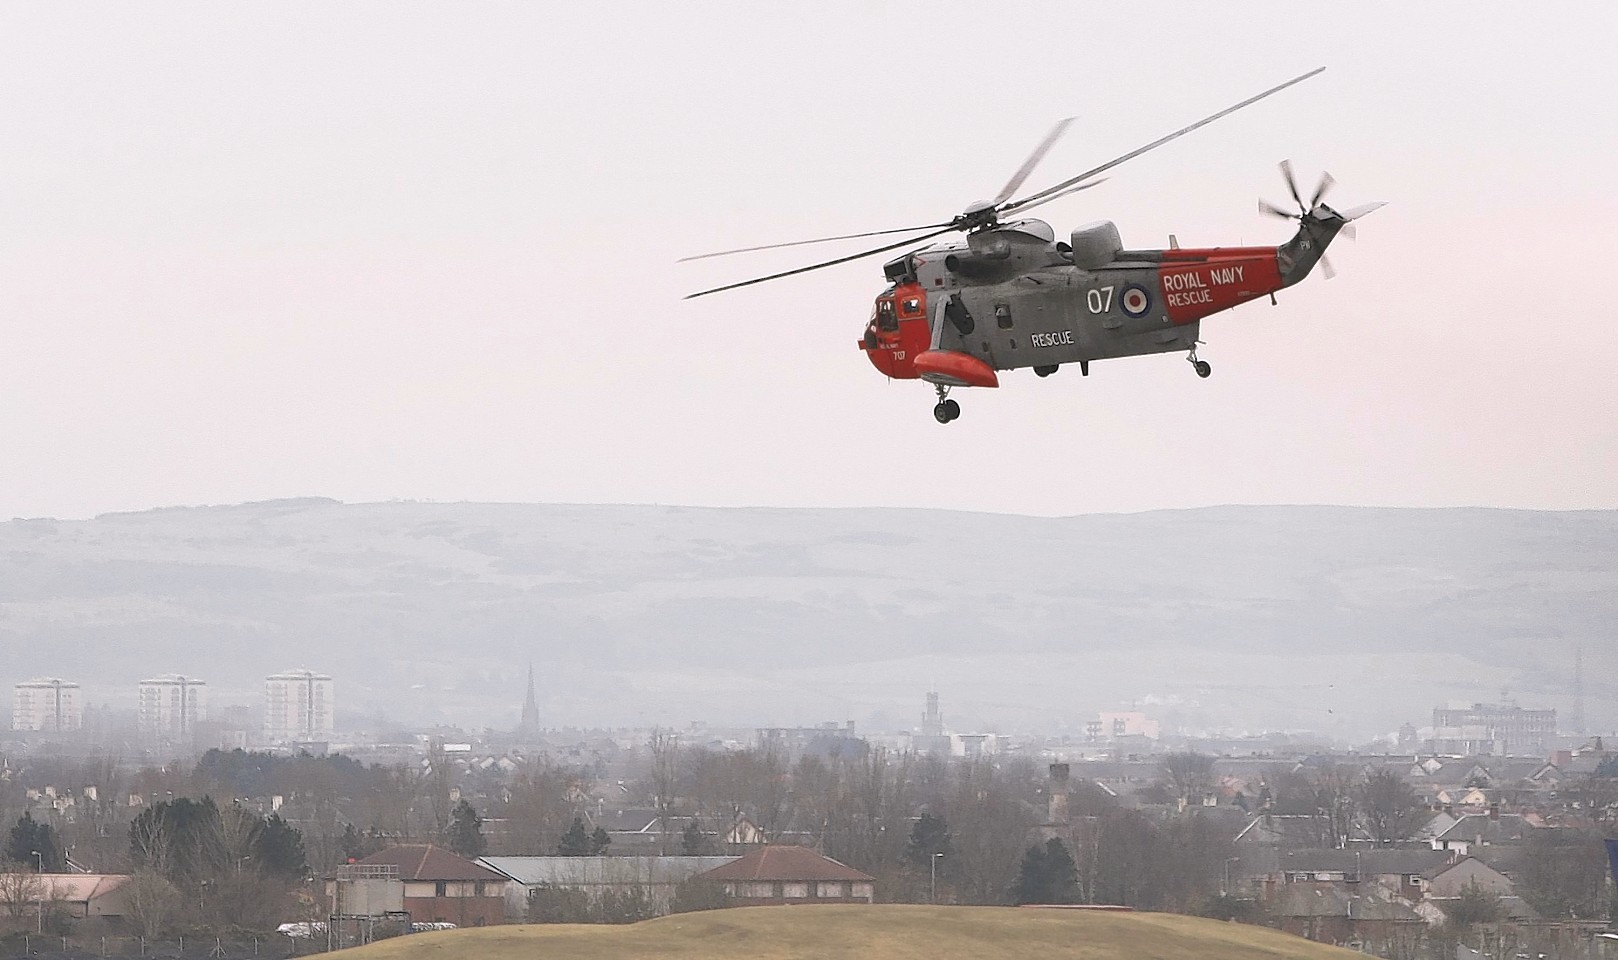 A Sea King helicopter takes off from HMS Gannet